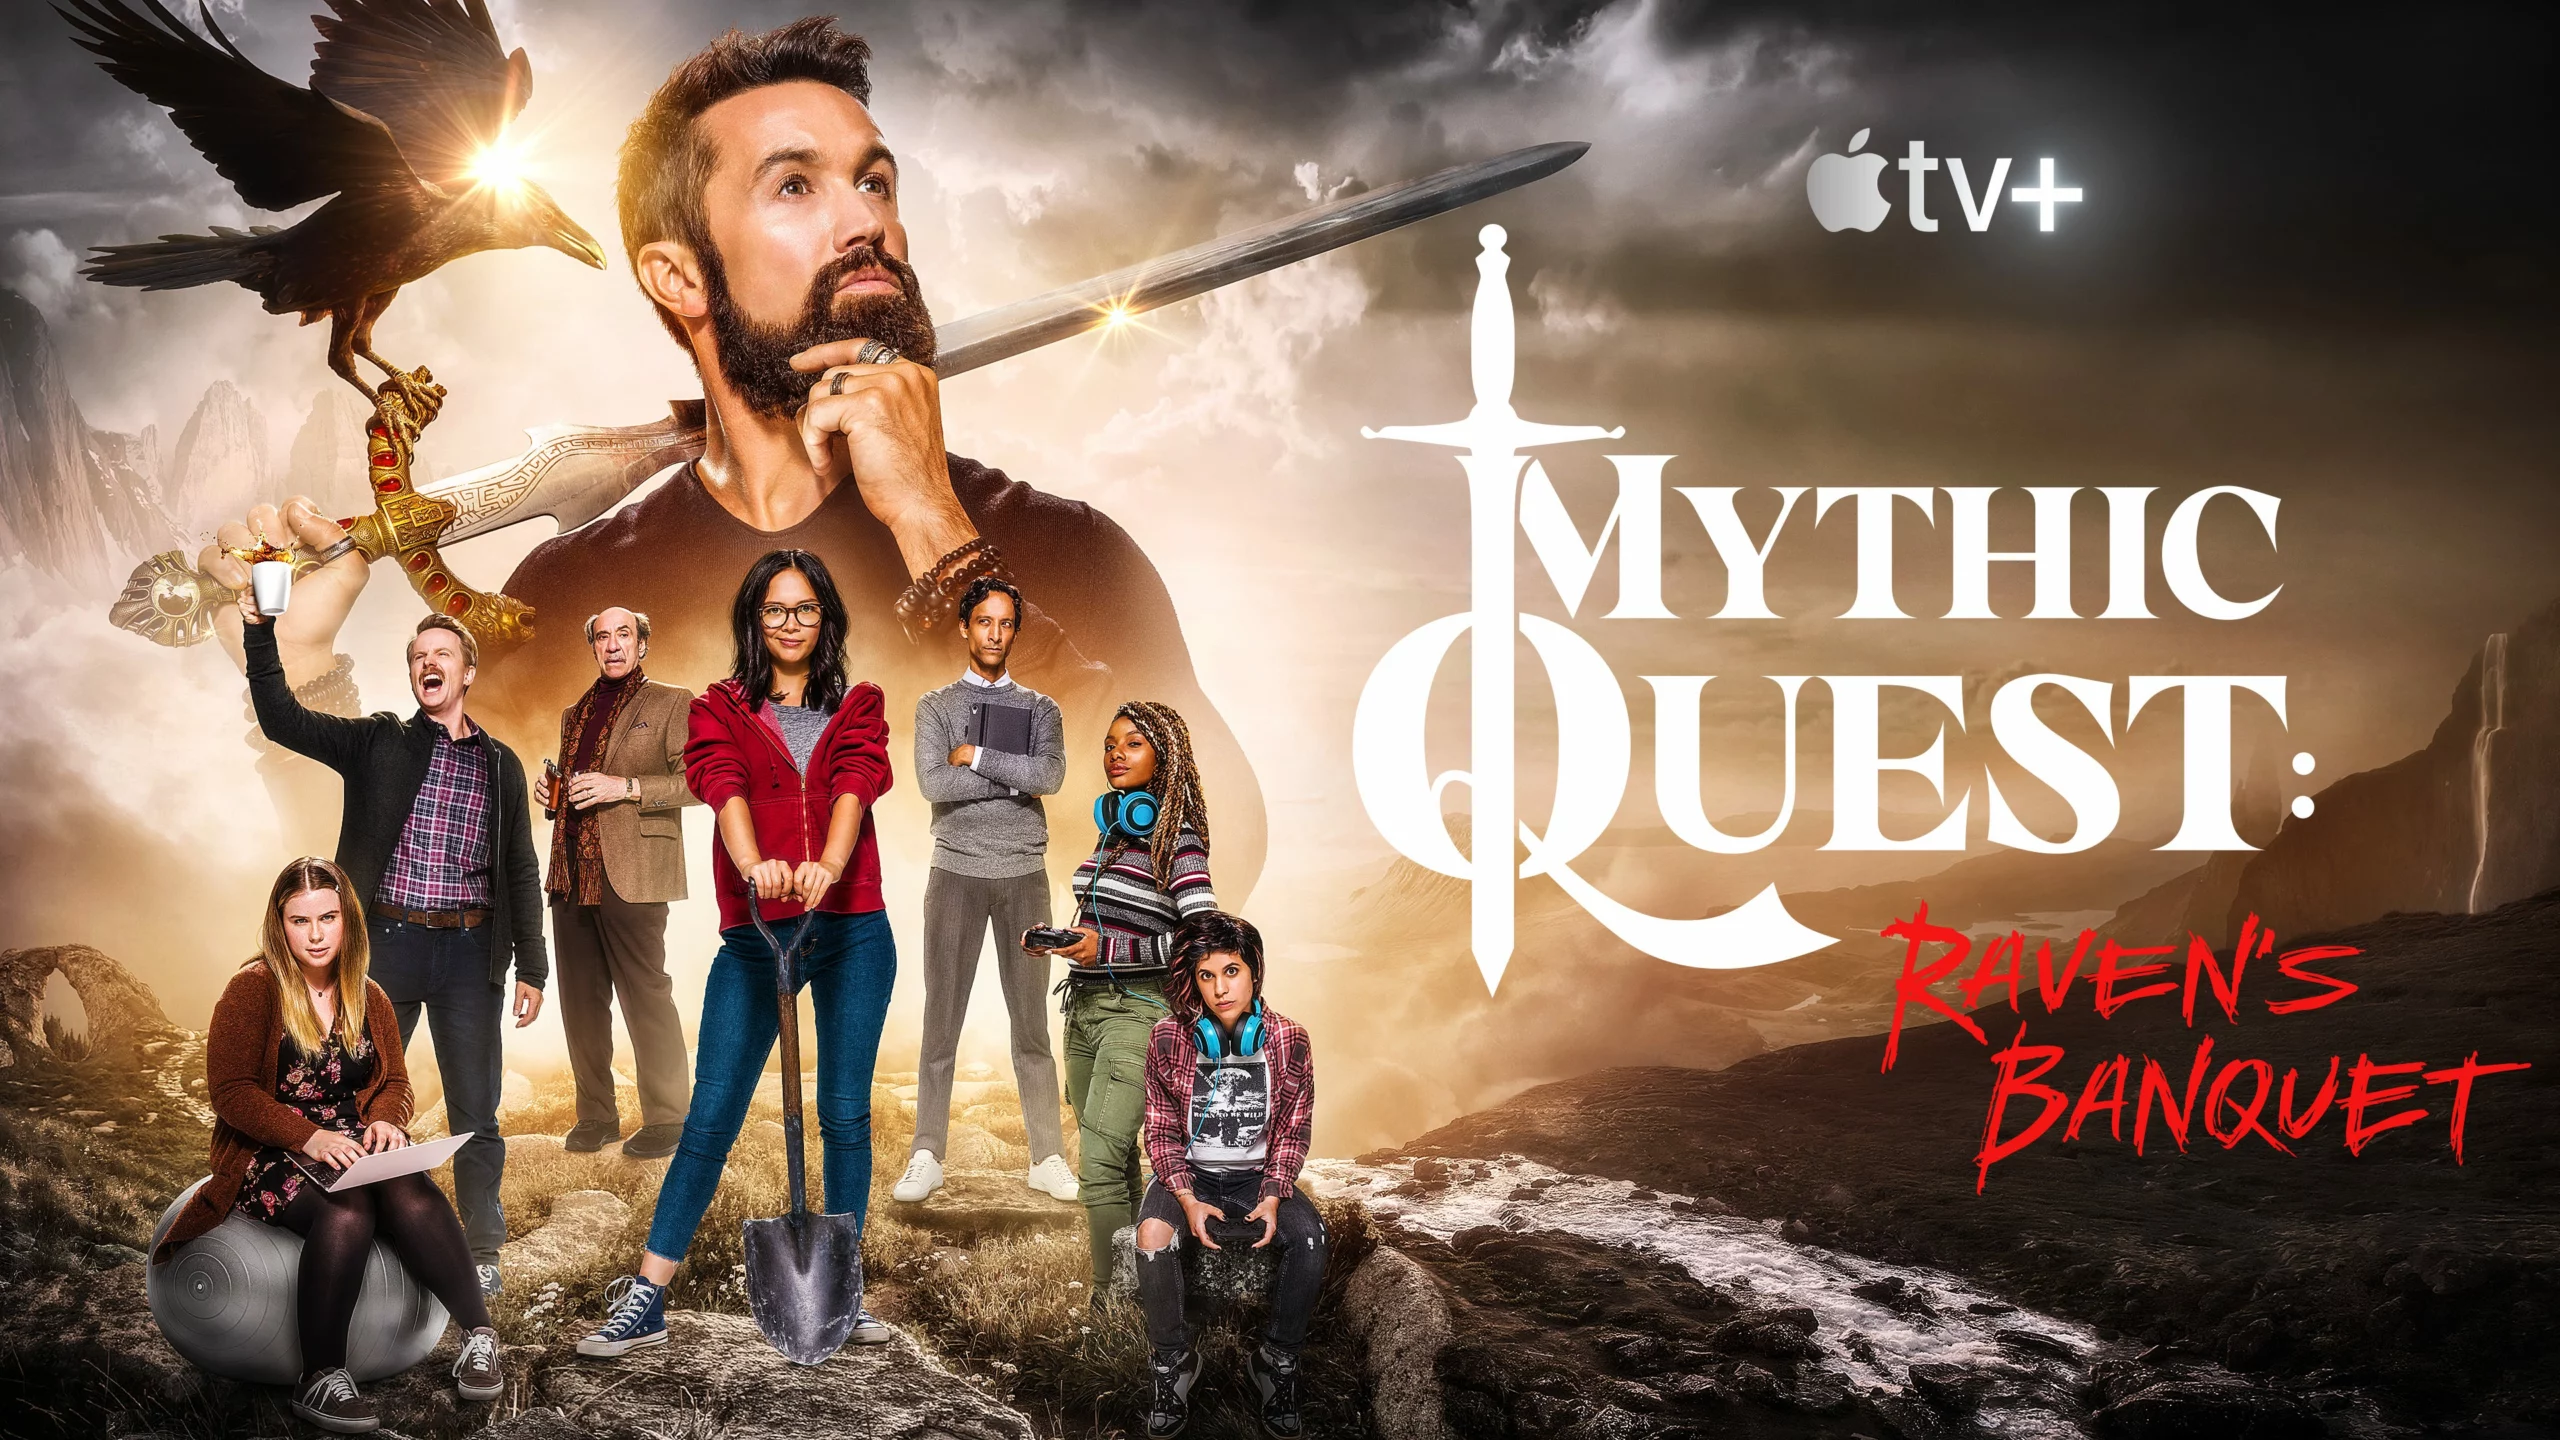 Mythic Quest Cast (2020): Full List of Characters & Actors